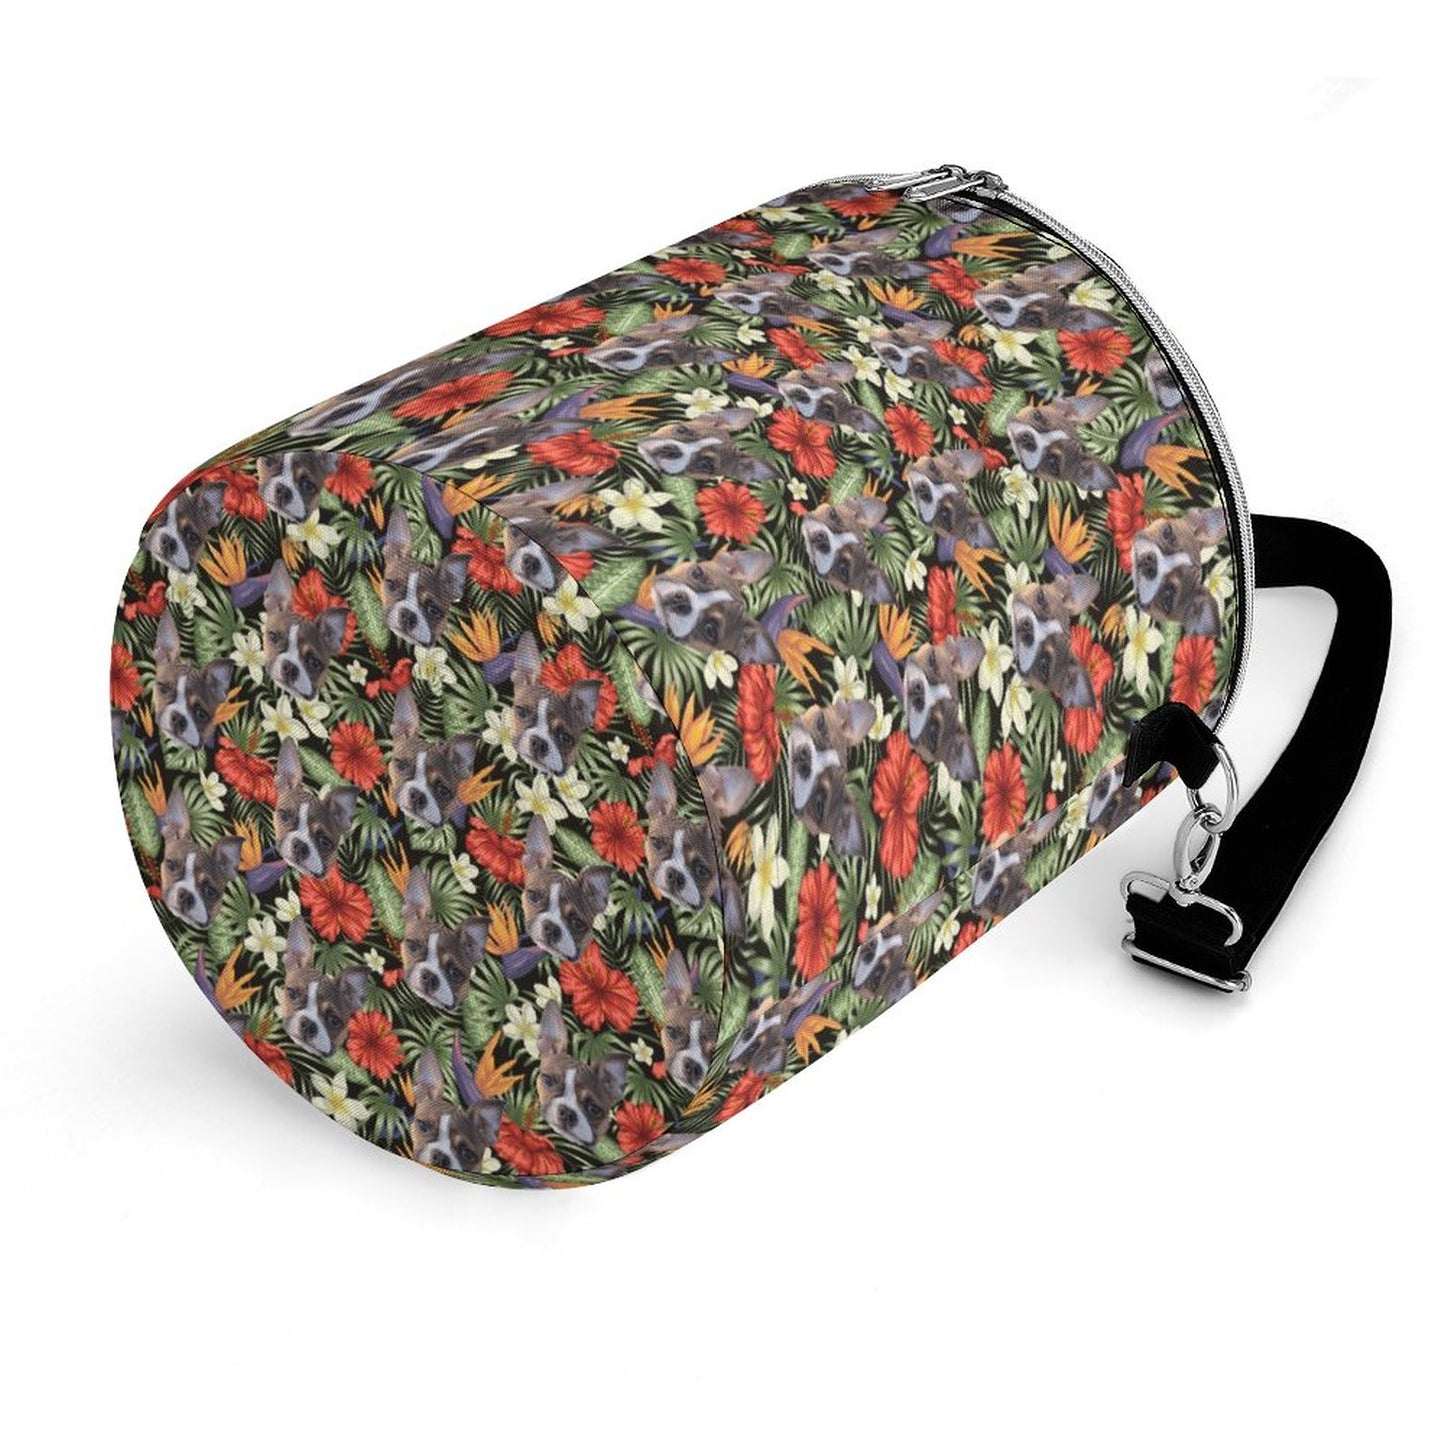 HAWAIIAN STYLE FACE -  Collapsible Insulated Cooler Bag